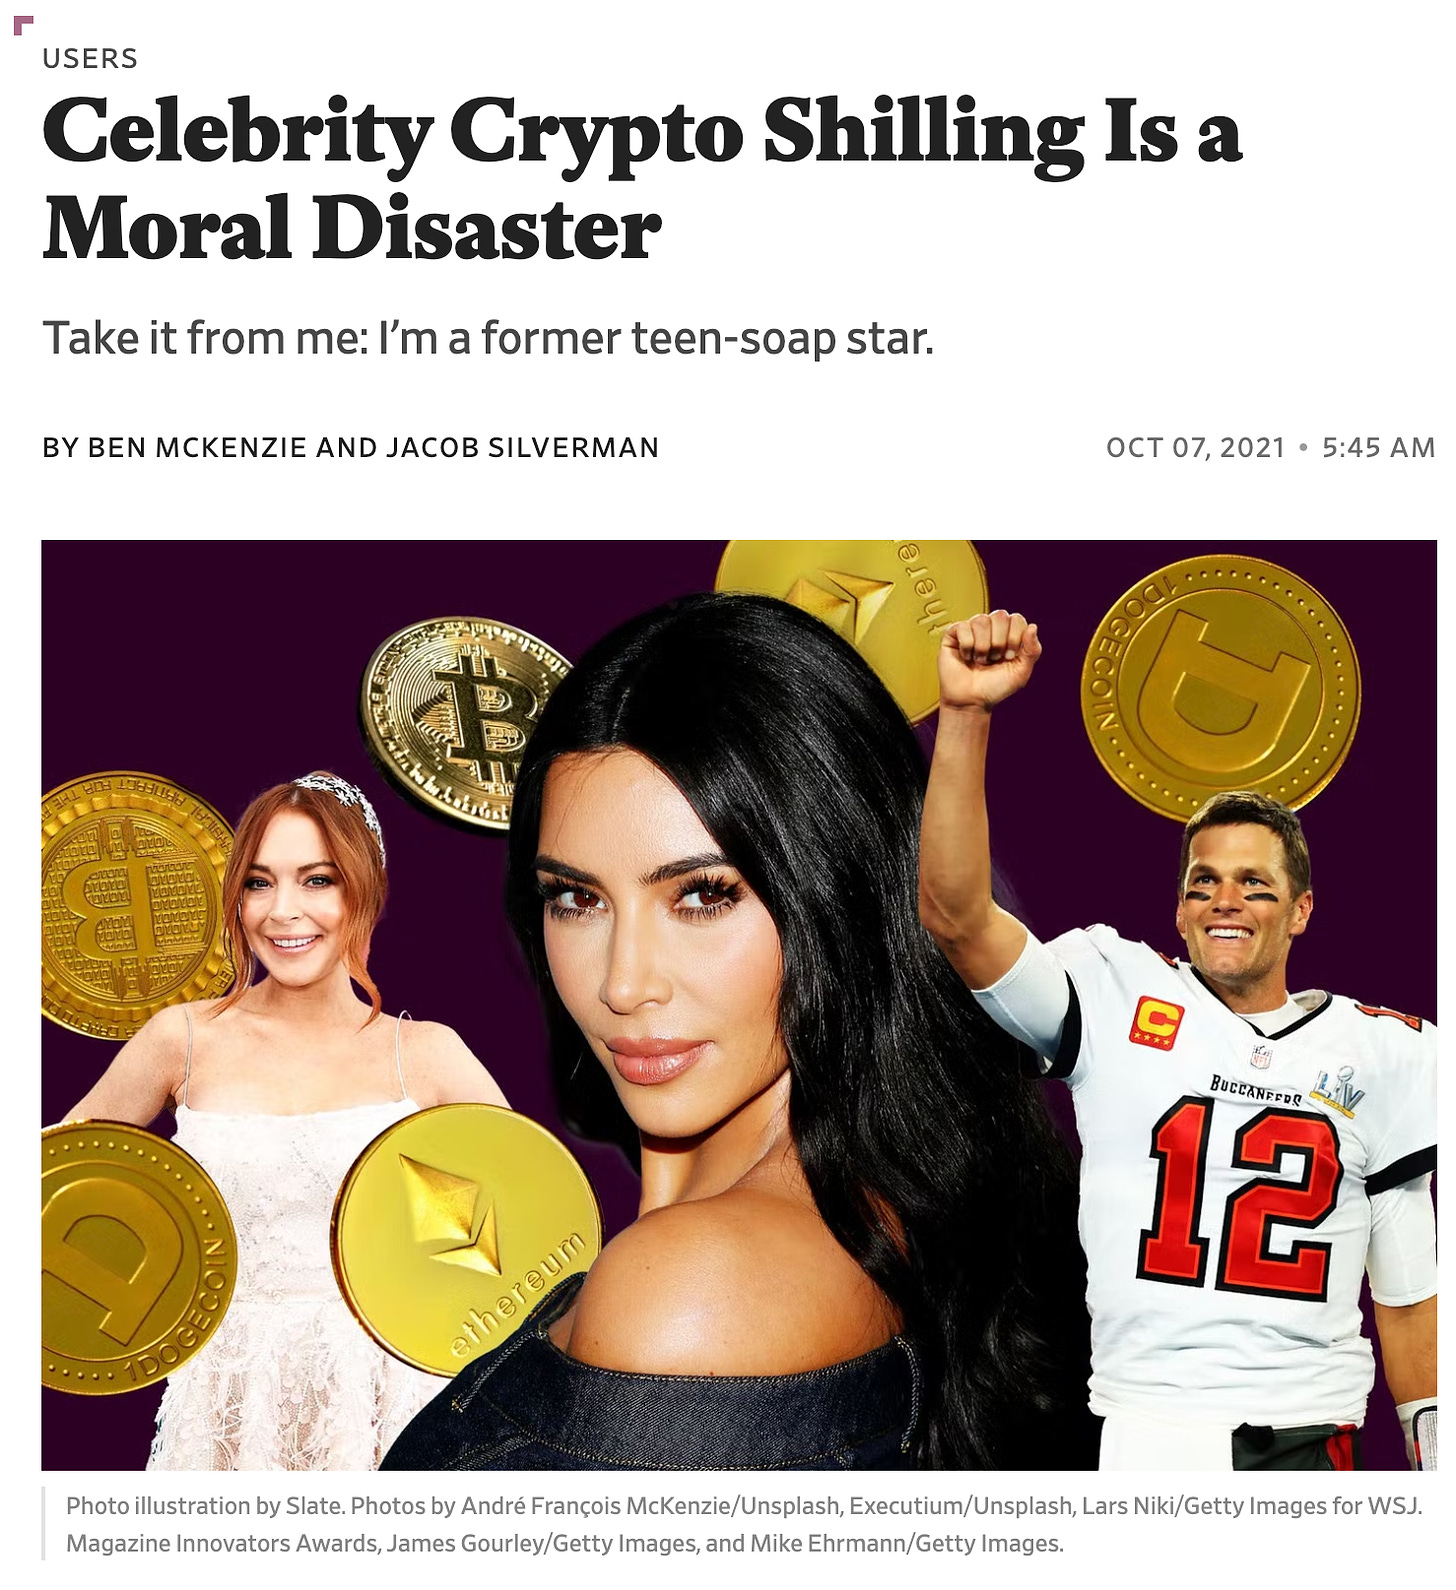 Screenshot of the headline and splash image for the article by Ben McKenzie and Jacob Silverman, titled "Celebrity Crypto Shilling Is a Moral Disaster." It is a collage of images of Lindsay Lohan, Kim Kardashian, and Tom Brady, amidst gold coins with various cryptocurrency symbols on them.